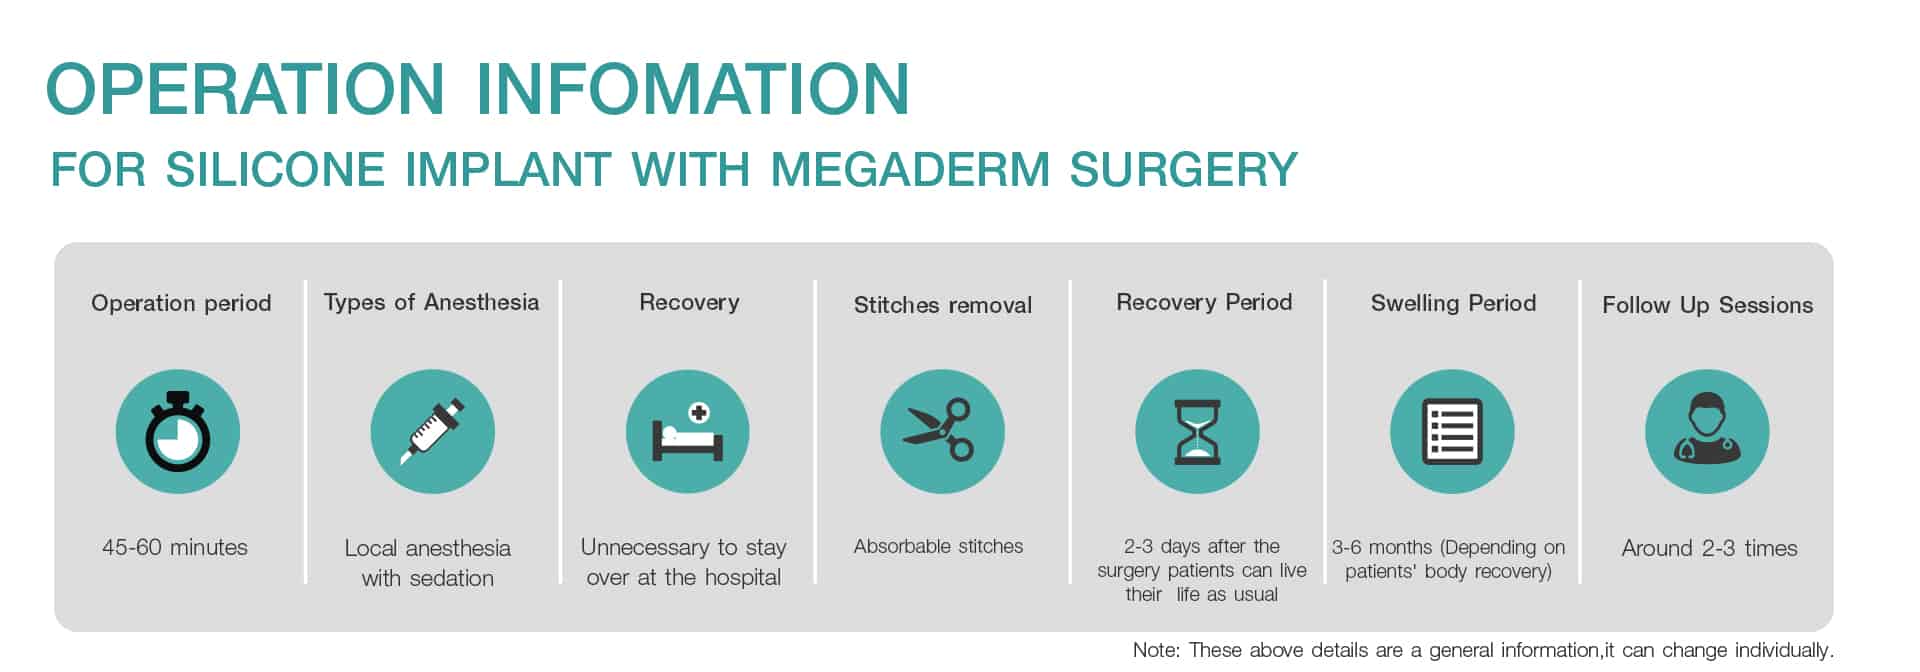 Operation Information for Silicone implant with Megaderm surgery